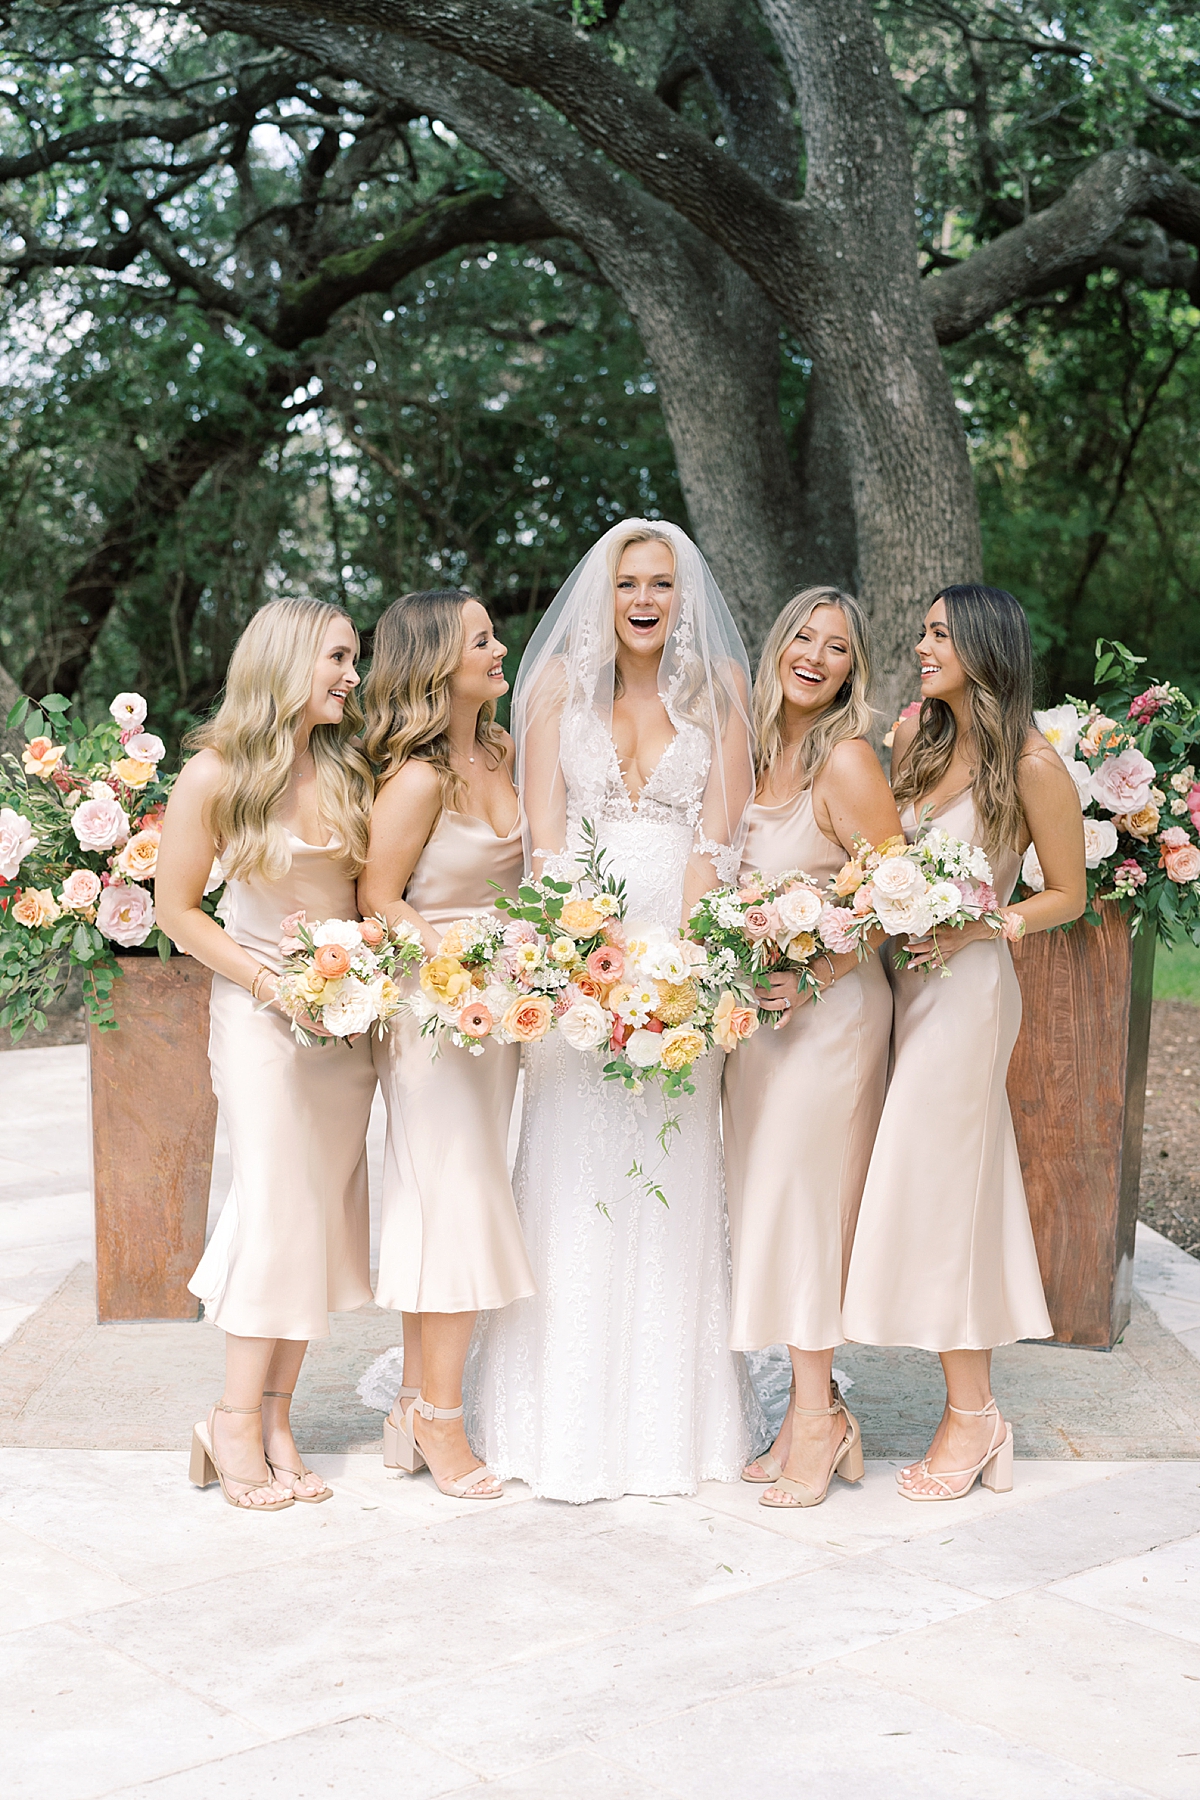 "We have chosen Texas as our home, and even though we aren't from here, we've absolutely loved living here and wanted to honor our chosen home on our day with a little western flair." A custom horseshoe logo, bolo ties, and cowboy boots encouraged..! This super fun western Mercury Hall Wedding was one for the books! Click through to see all of their fun custom wedding details!